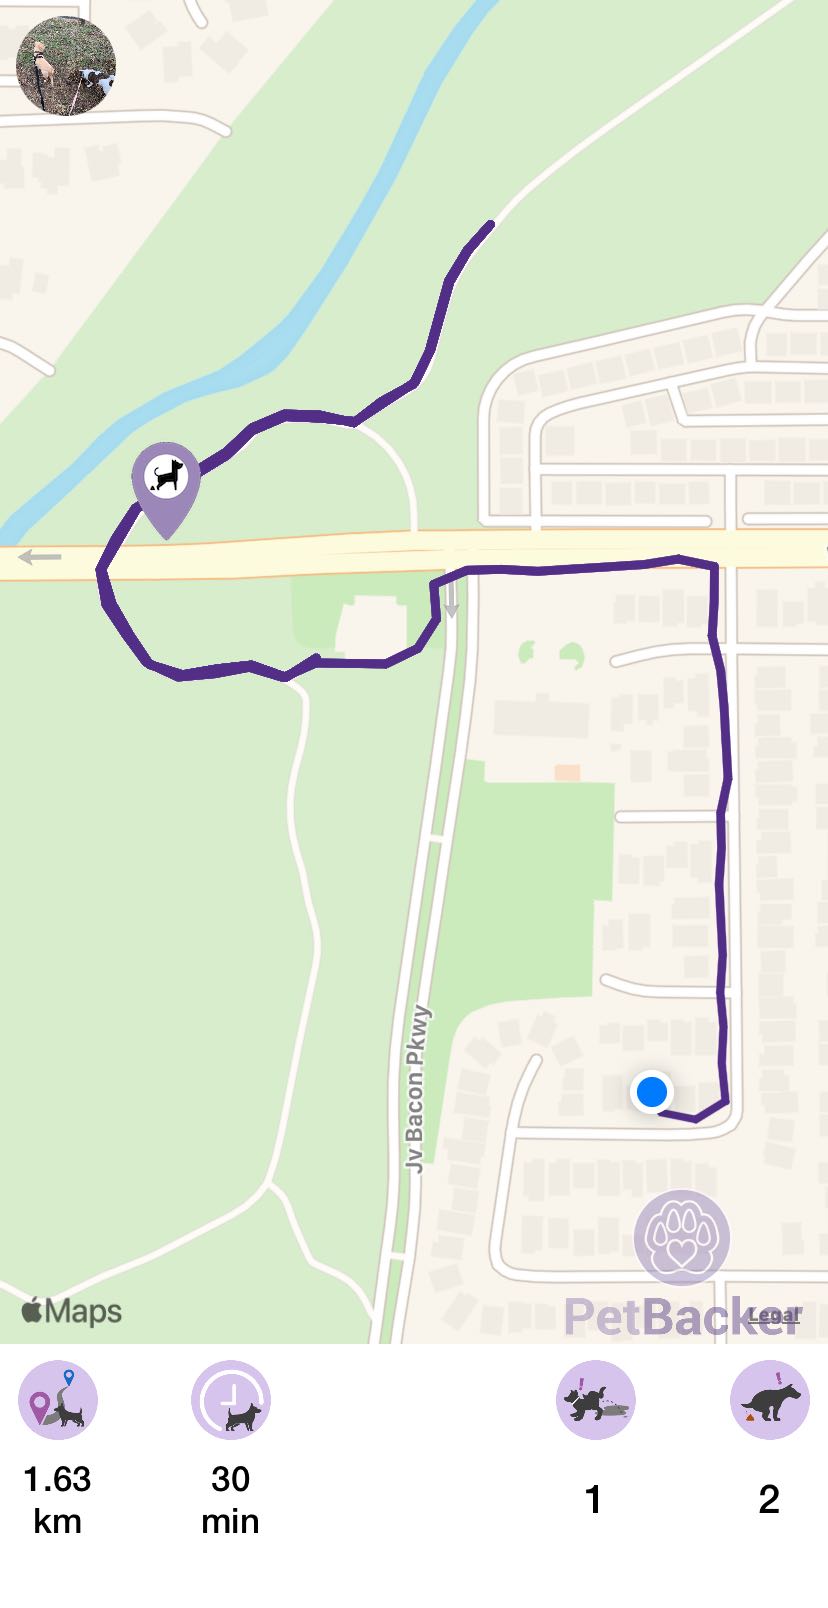 Just completed pet walking of 1.63 km